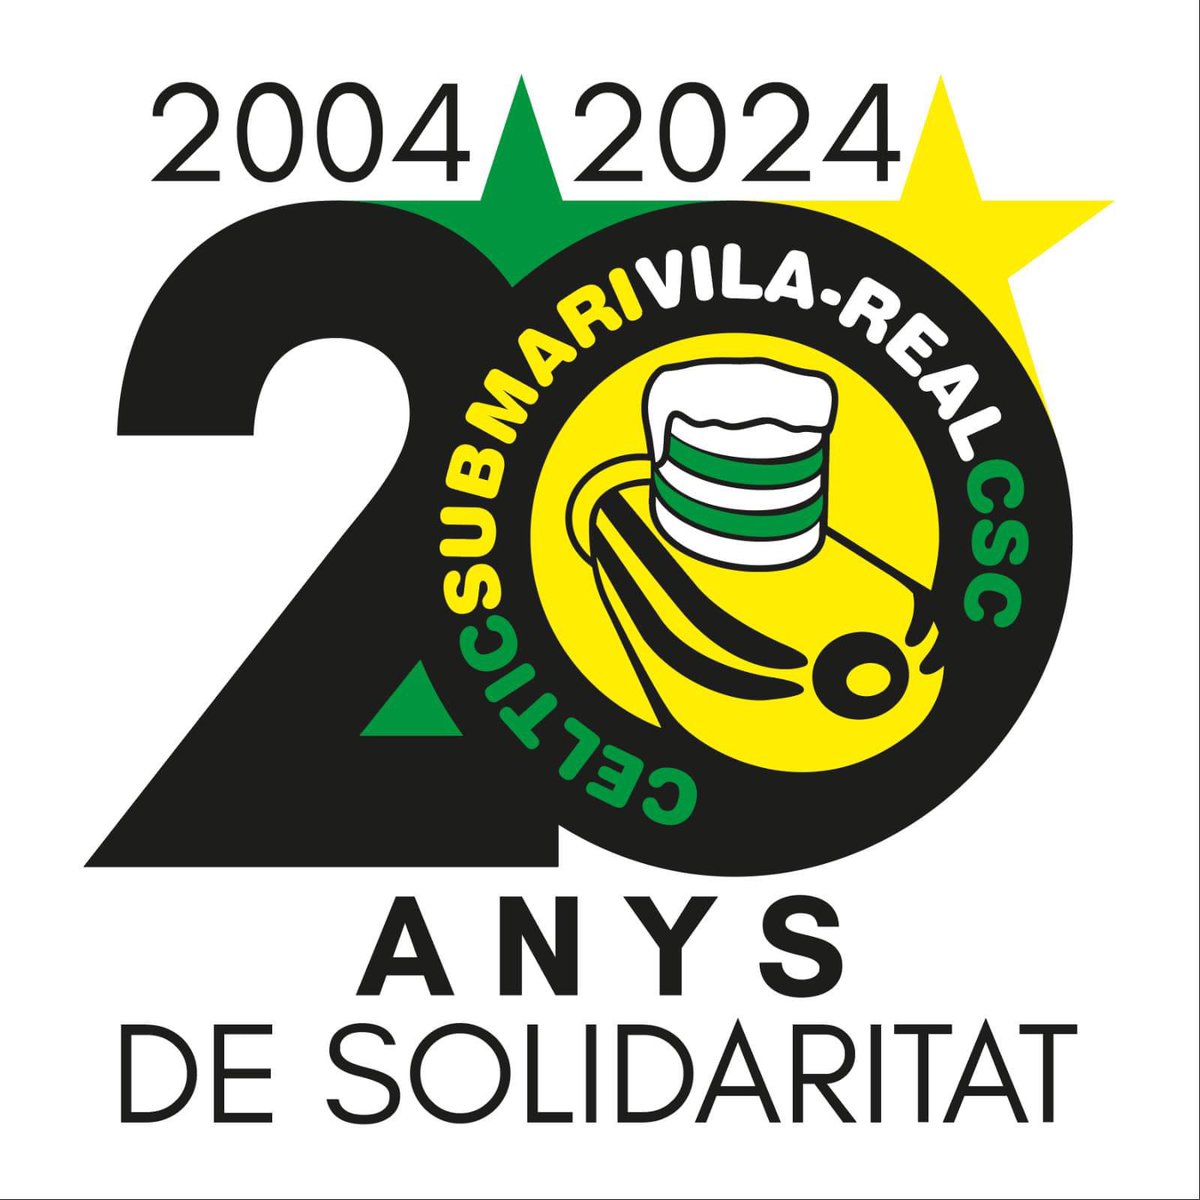 On a day like today, however, in 2004, Villarreal eliminated Celtic and qualified for the first time for a European semi-final in an unforgettable football festival. It all started with that match 20 years ago, giving birth to PENYA CELTIC SUBMARÍ. @CelticFC @FoundationCFC 💛💚